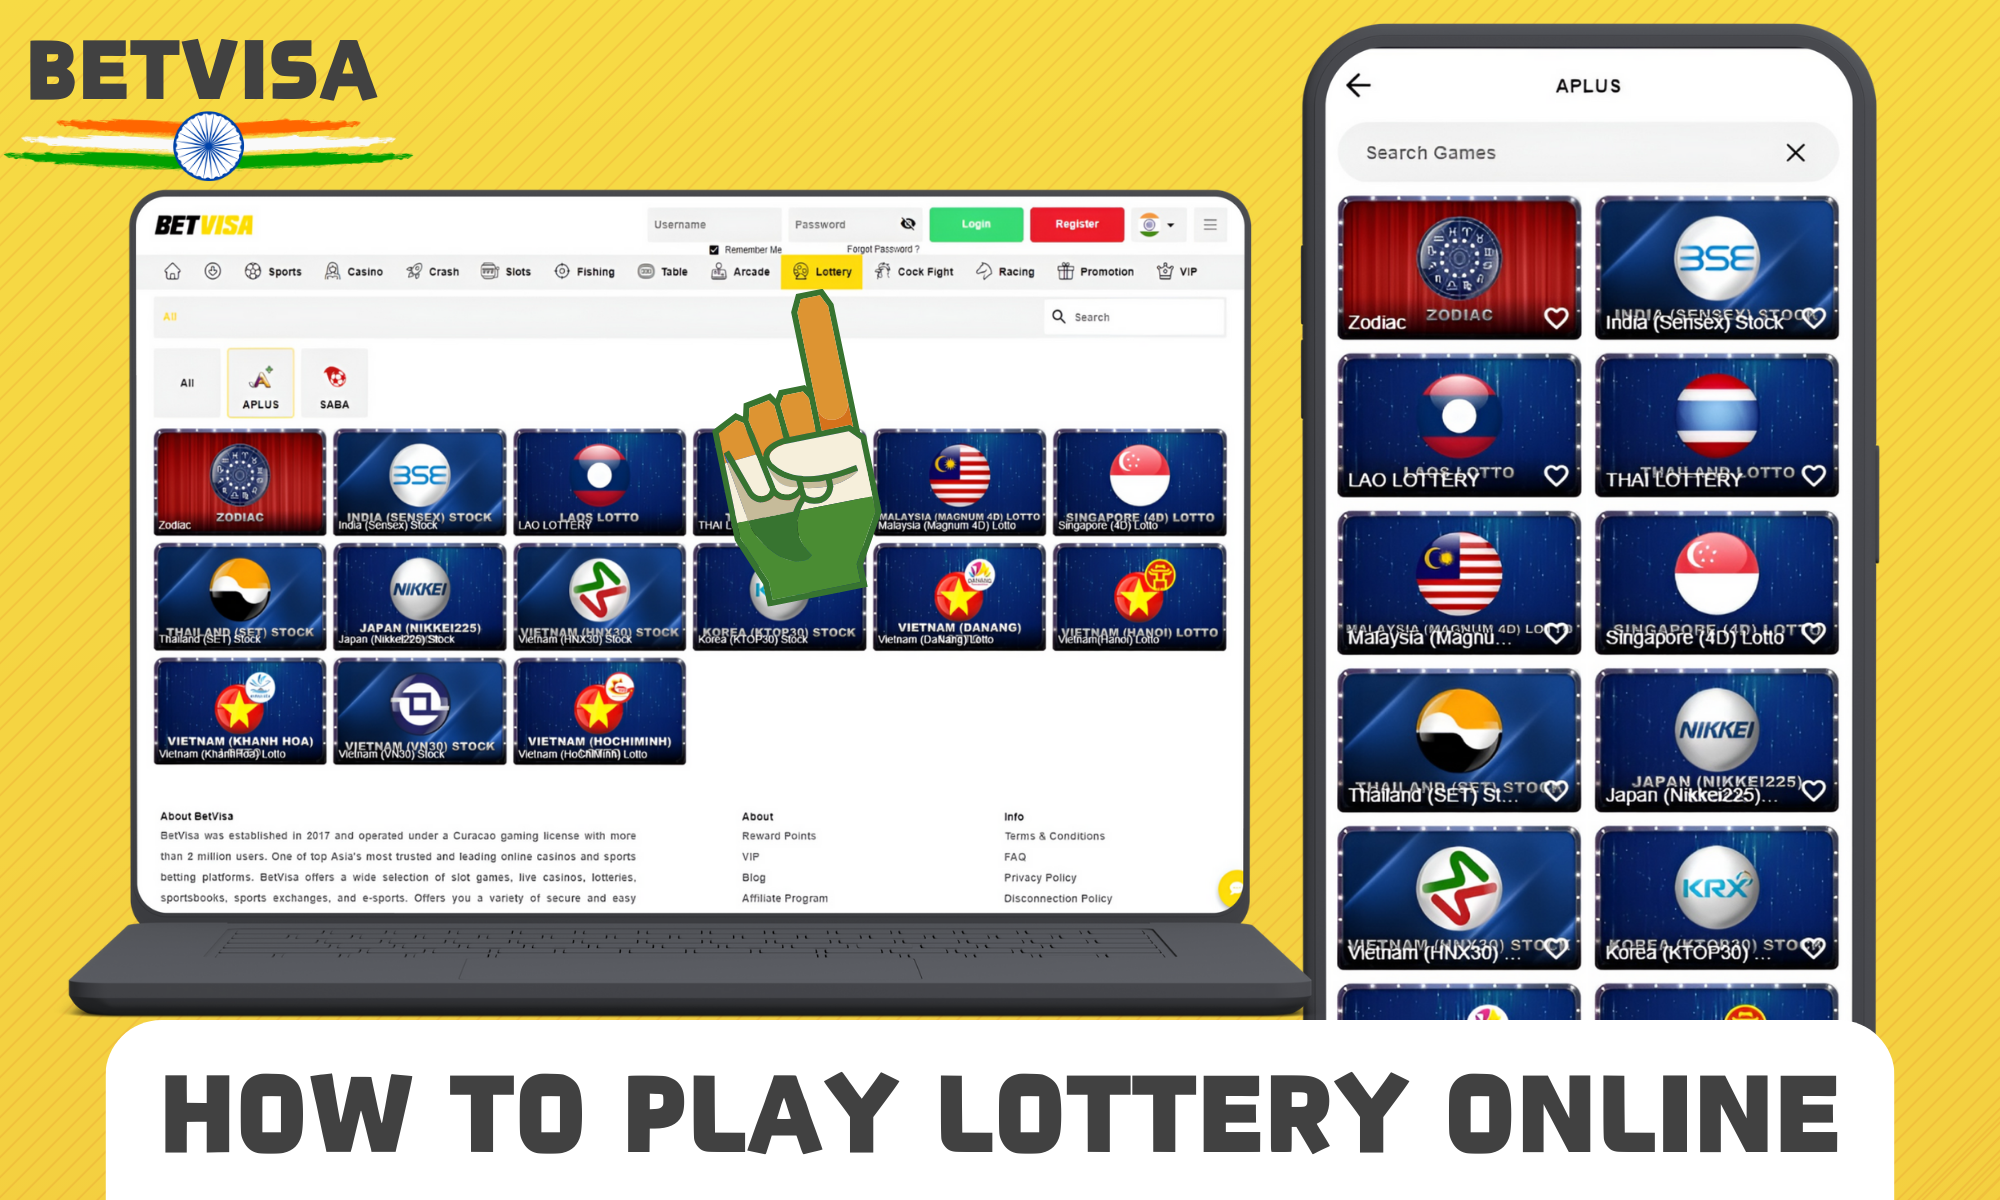 How to Start Playing Betvisa Lottery